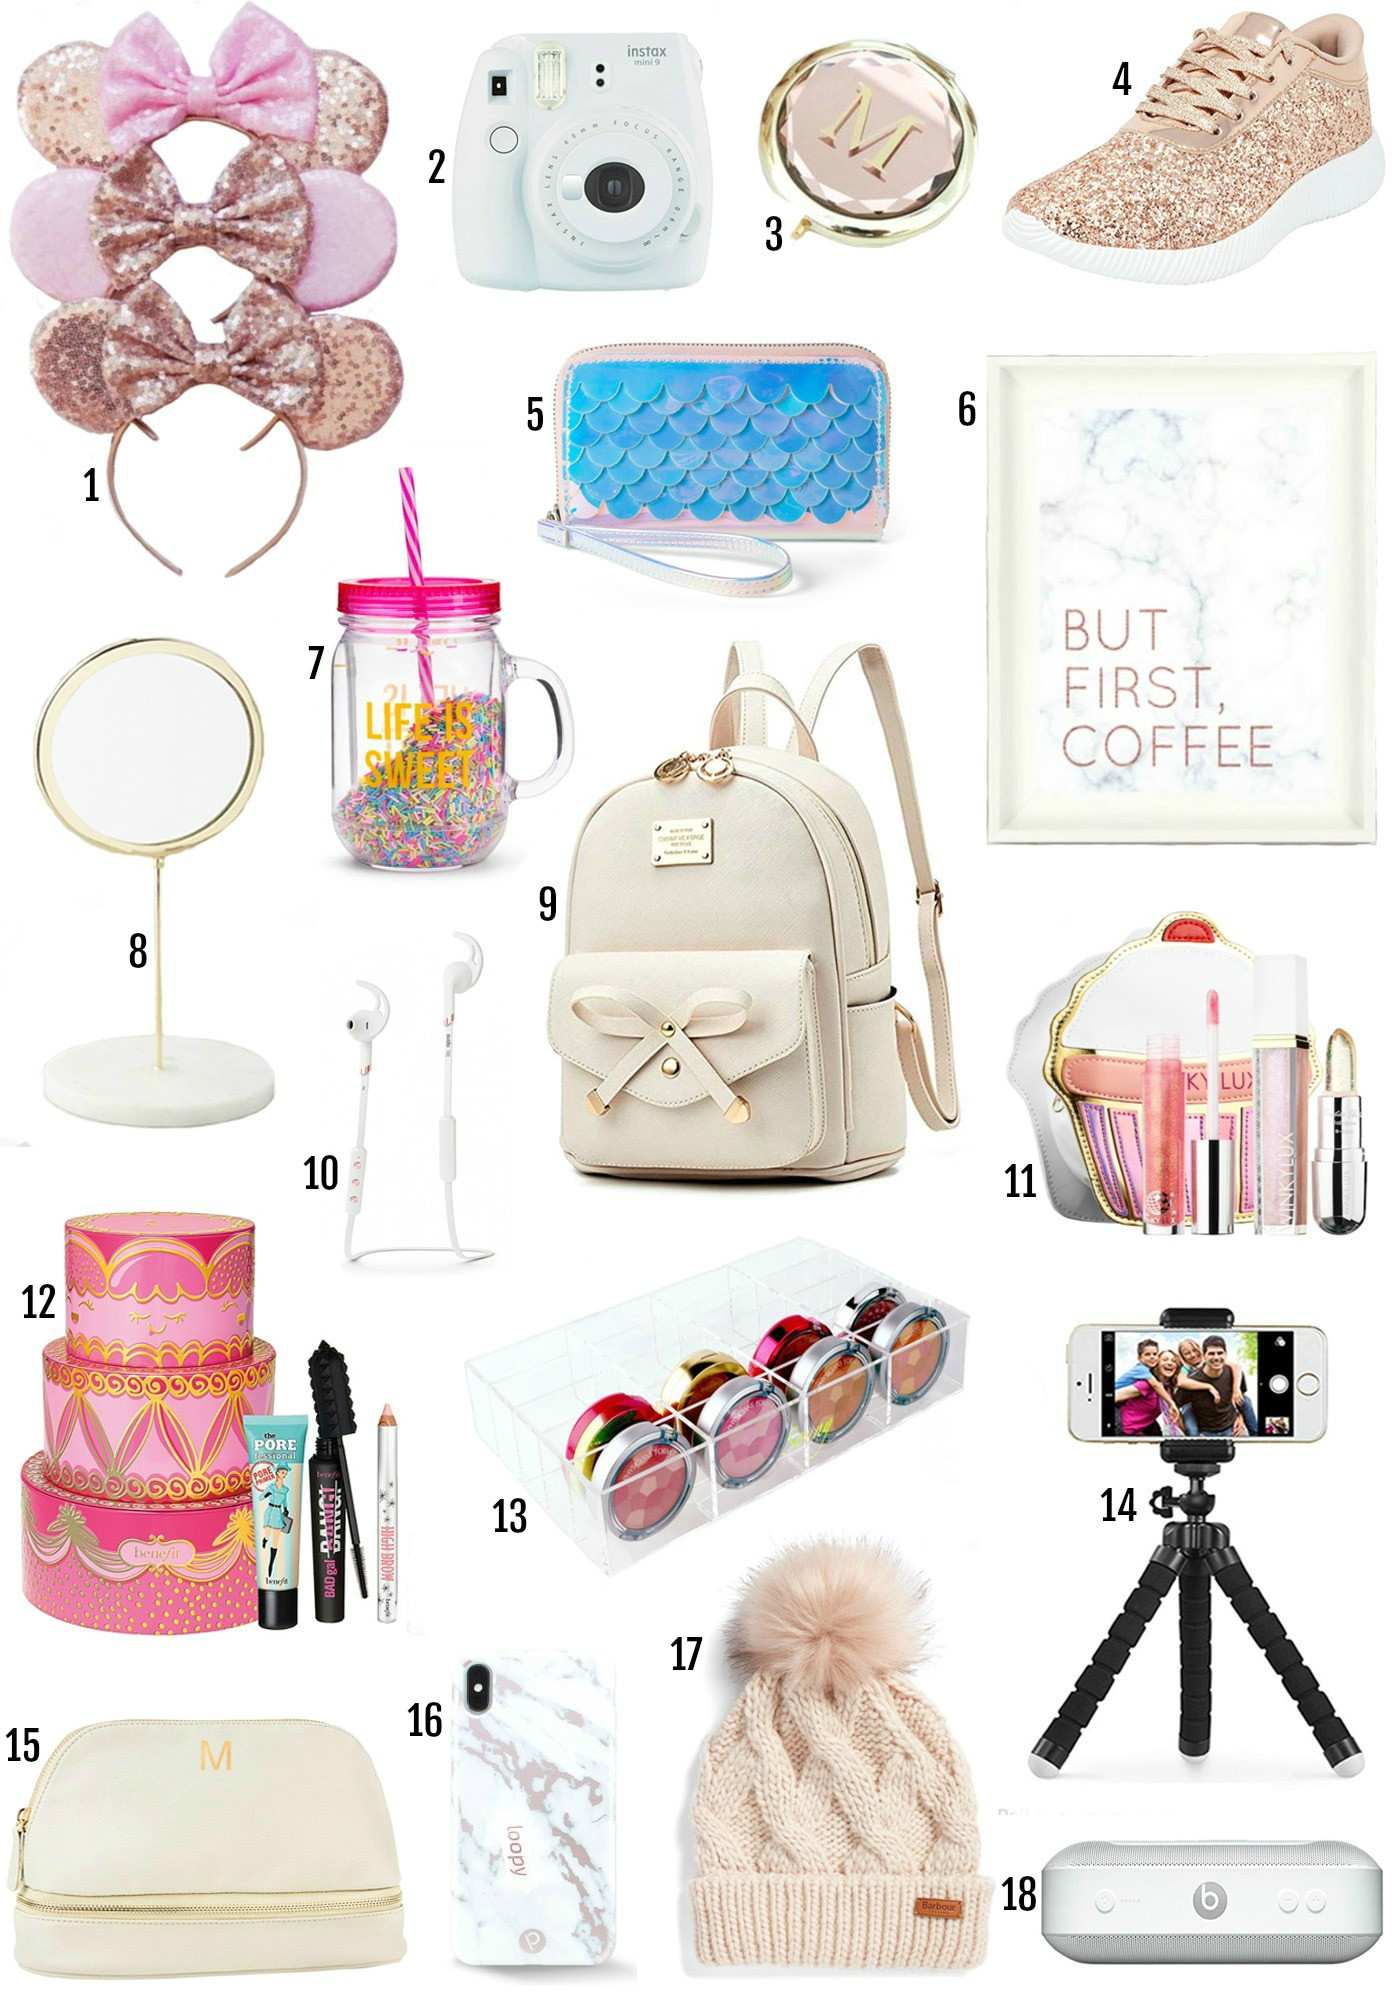 Teenage Gift Ideas For Girls
 Top Gifts For Teens